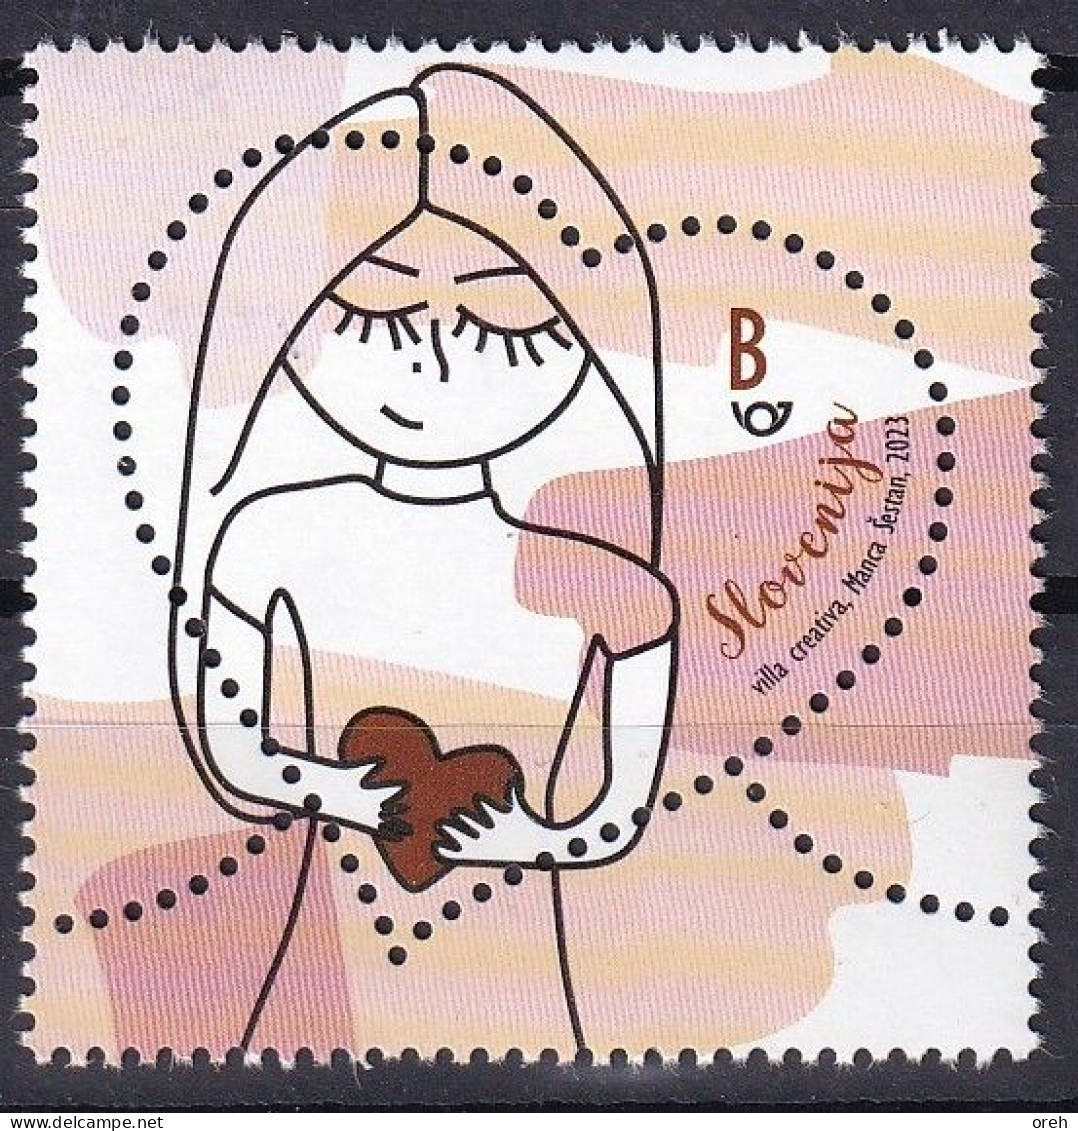 SLOVENIA,SLOWENIEN 2023,LOVE STAMPS,GREETING STAMP,LOVE GIVES BIRTH TO LOVEHEART,,MNH - Eslovenia